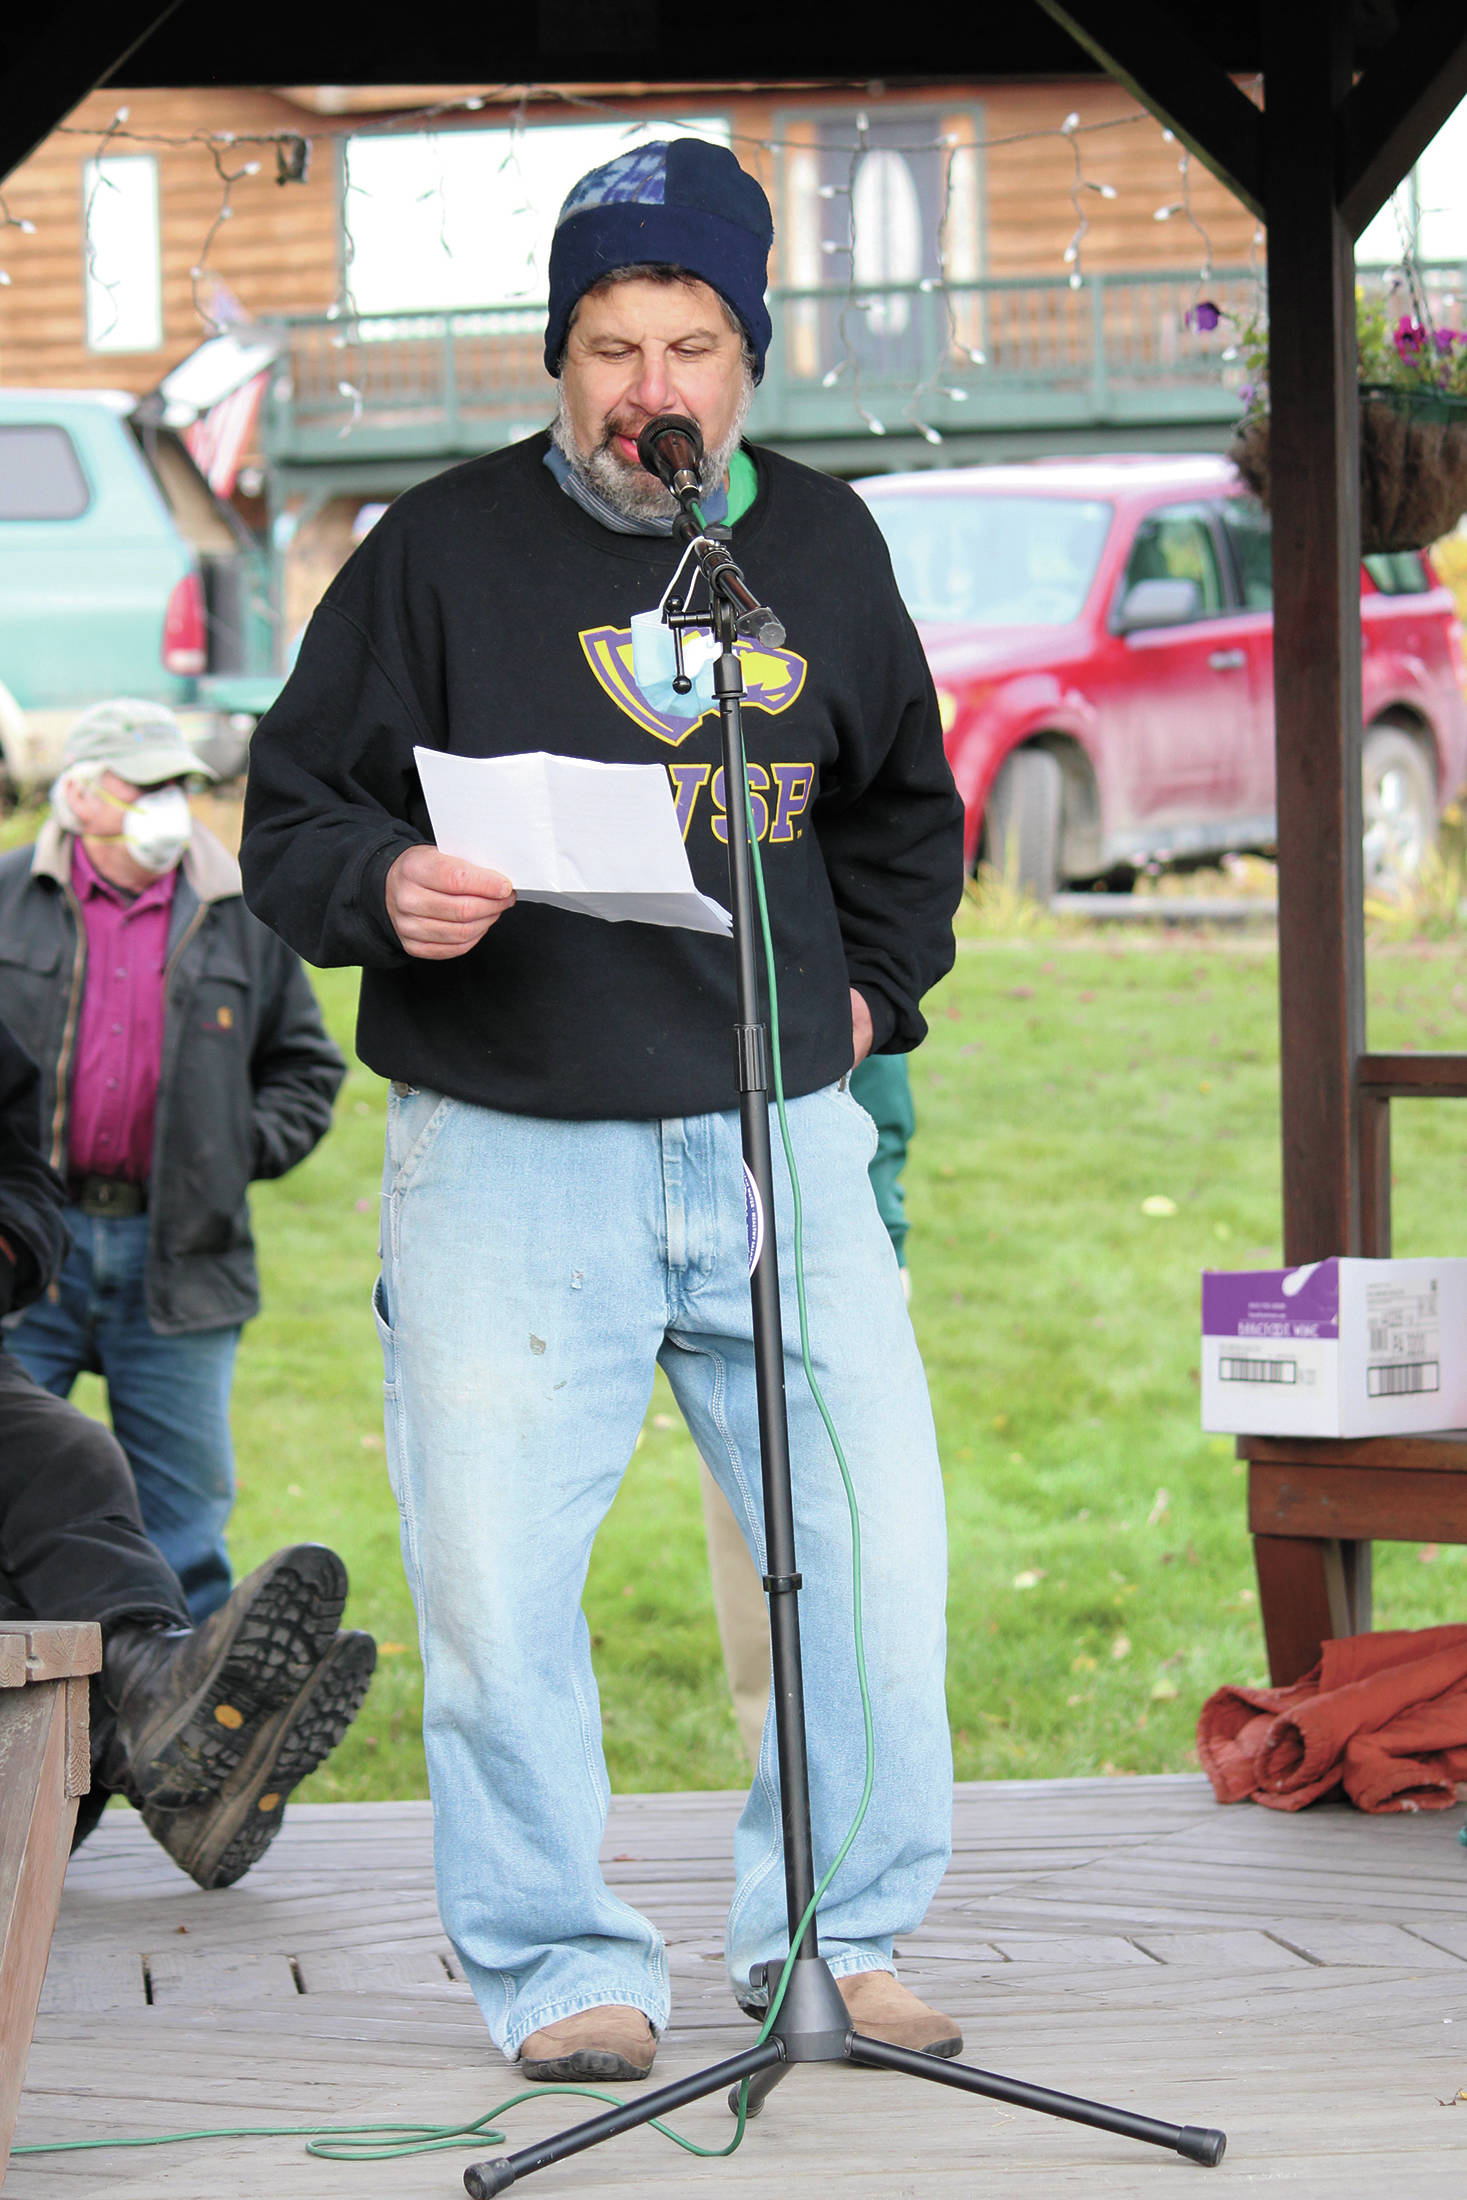 Alex Koplin speaks during a rally to commemorate Ruth Bader Ginsburg and protest swift action to replace her on the Supreme Court on Saturday, Oct. 17, 2020 at WKFL Park in Homer, Alaska. (Photo by Megan Pacer/Homer News)